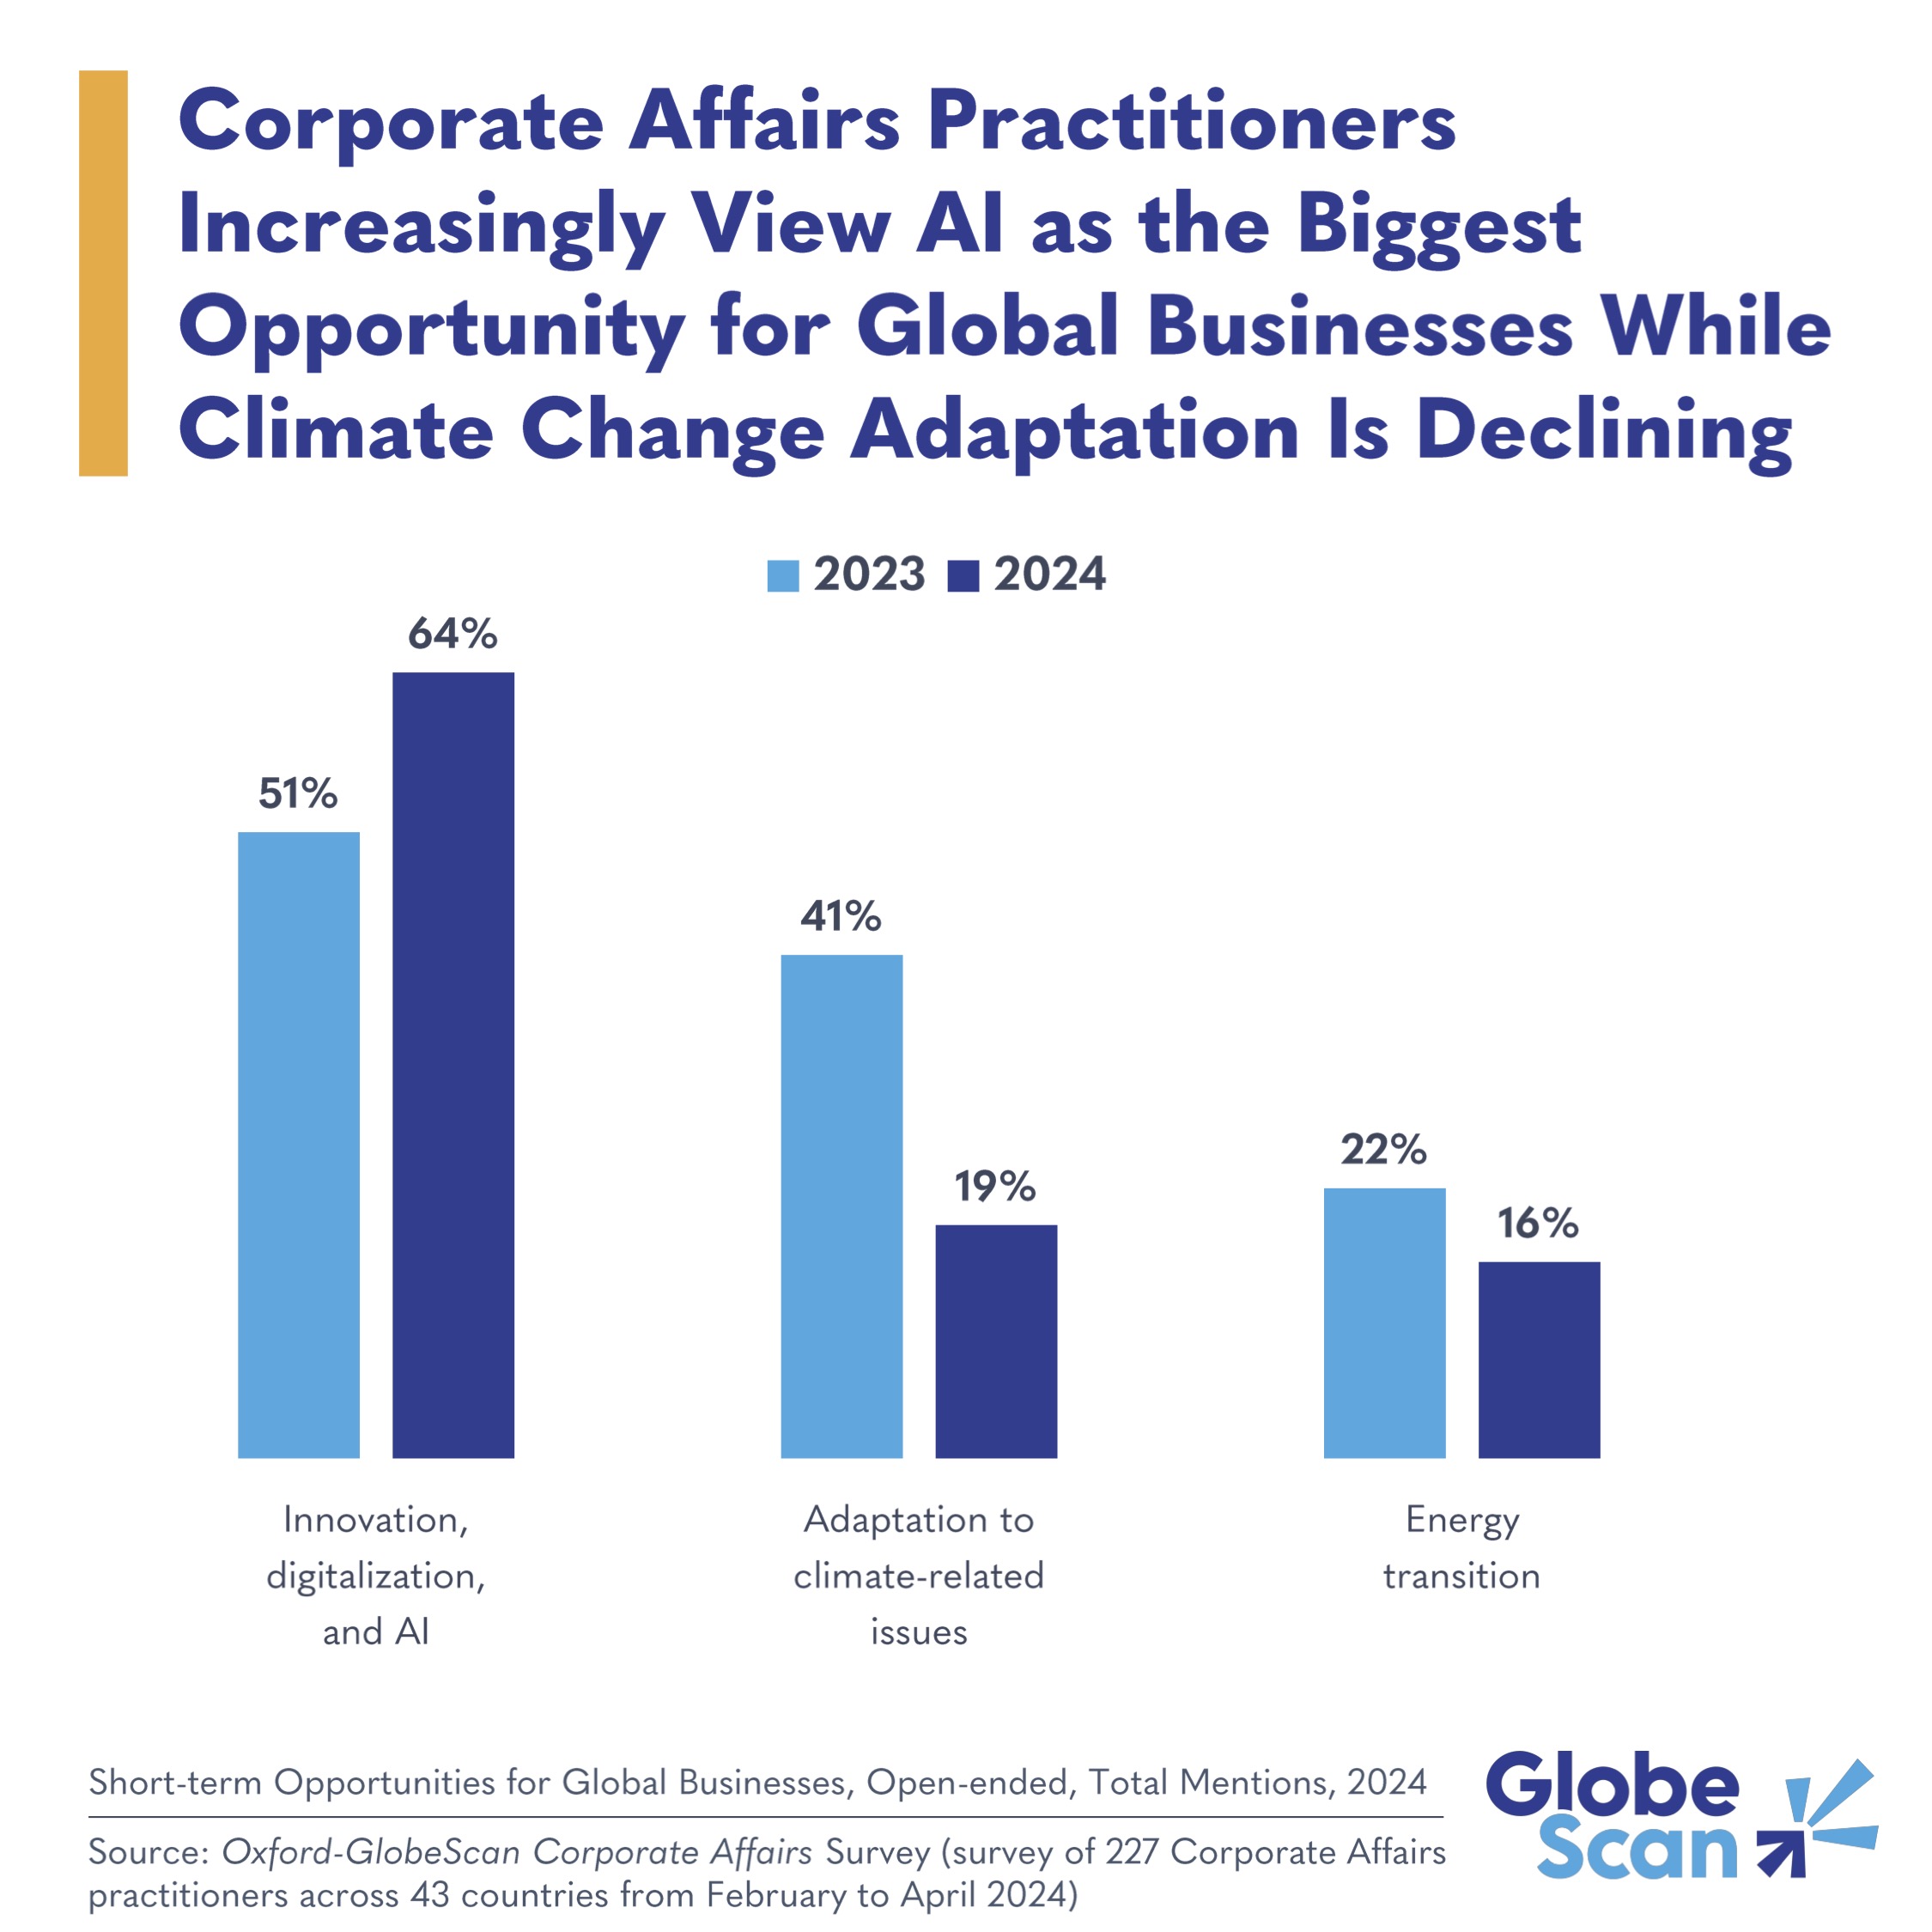 Corporate Affairs Practitioners Increasingly View AI as the Biggest Opportunity for Global Businesses While Climate Change Adaptation Is Declining